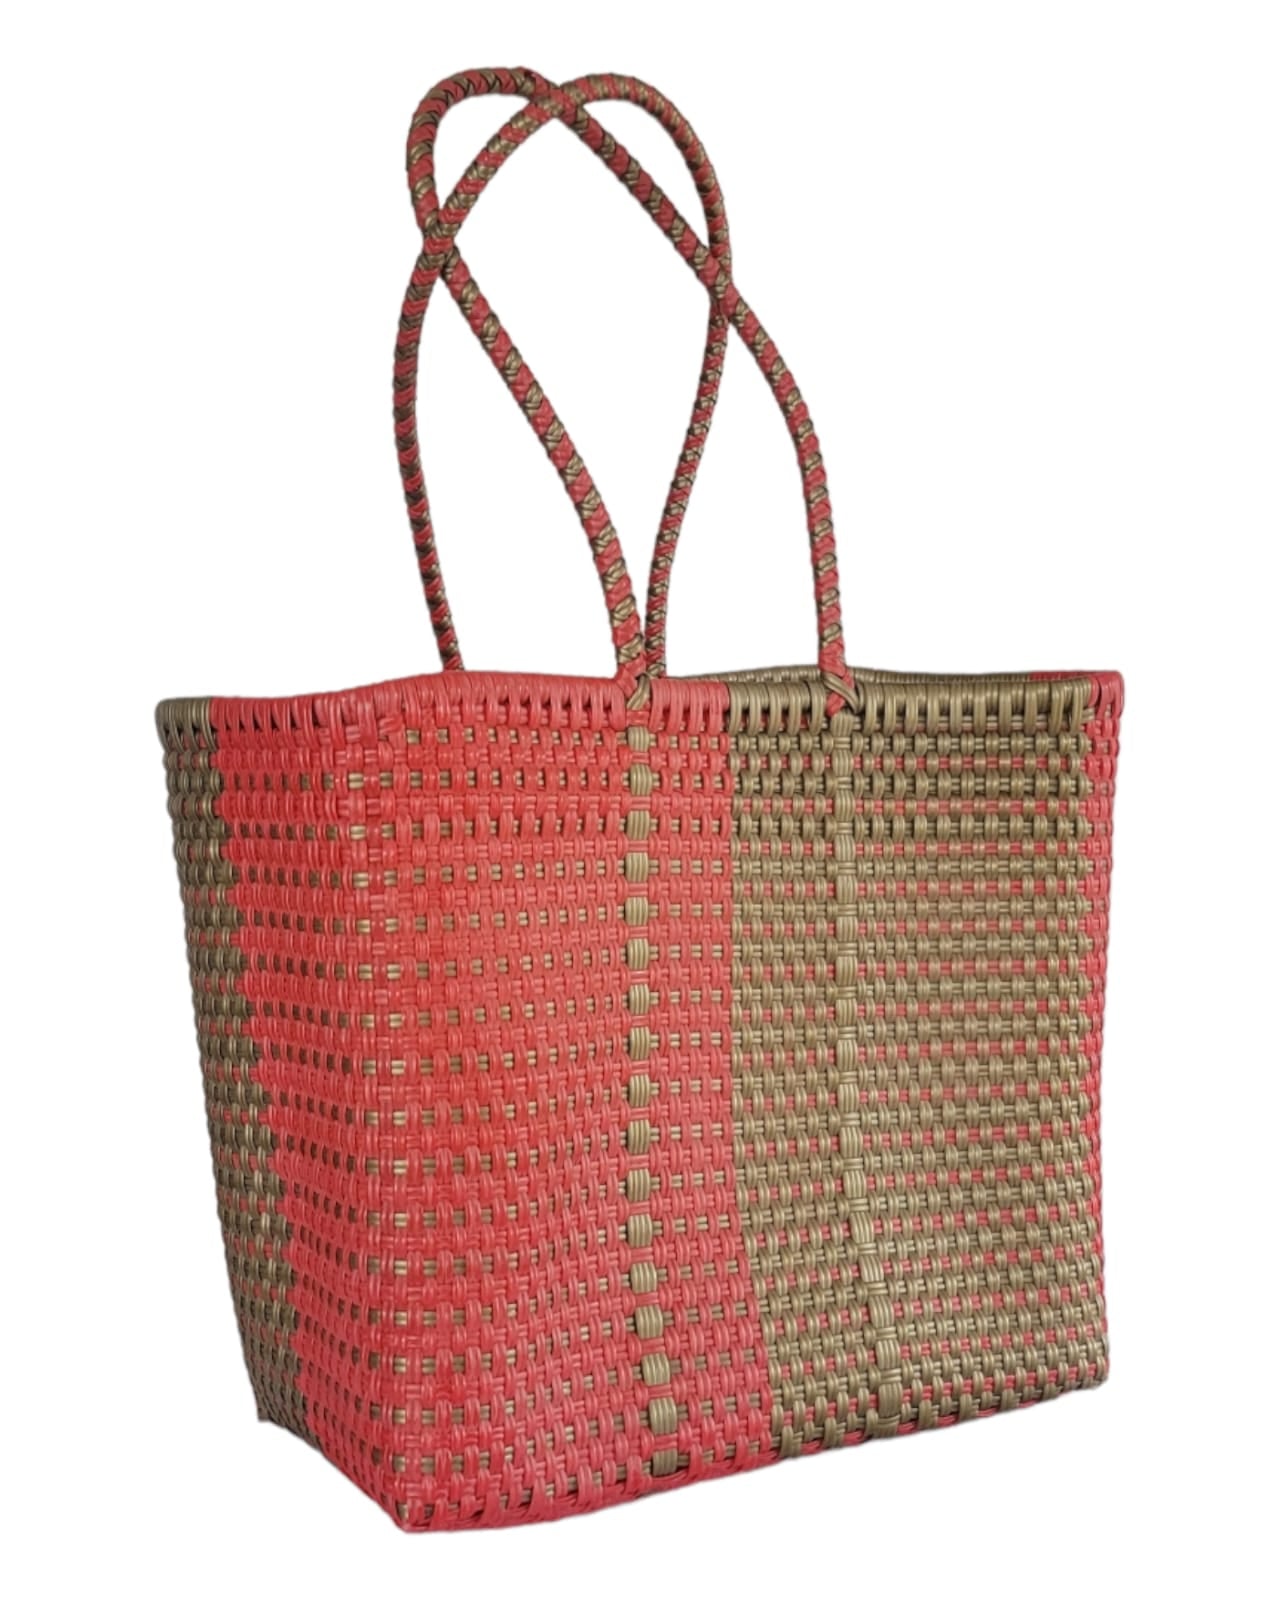 Be Praia | Red & Gold Large Tote | Beach Tote Handwoven Recycle Plastic Bag